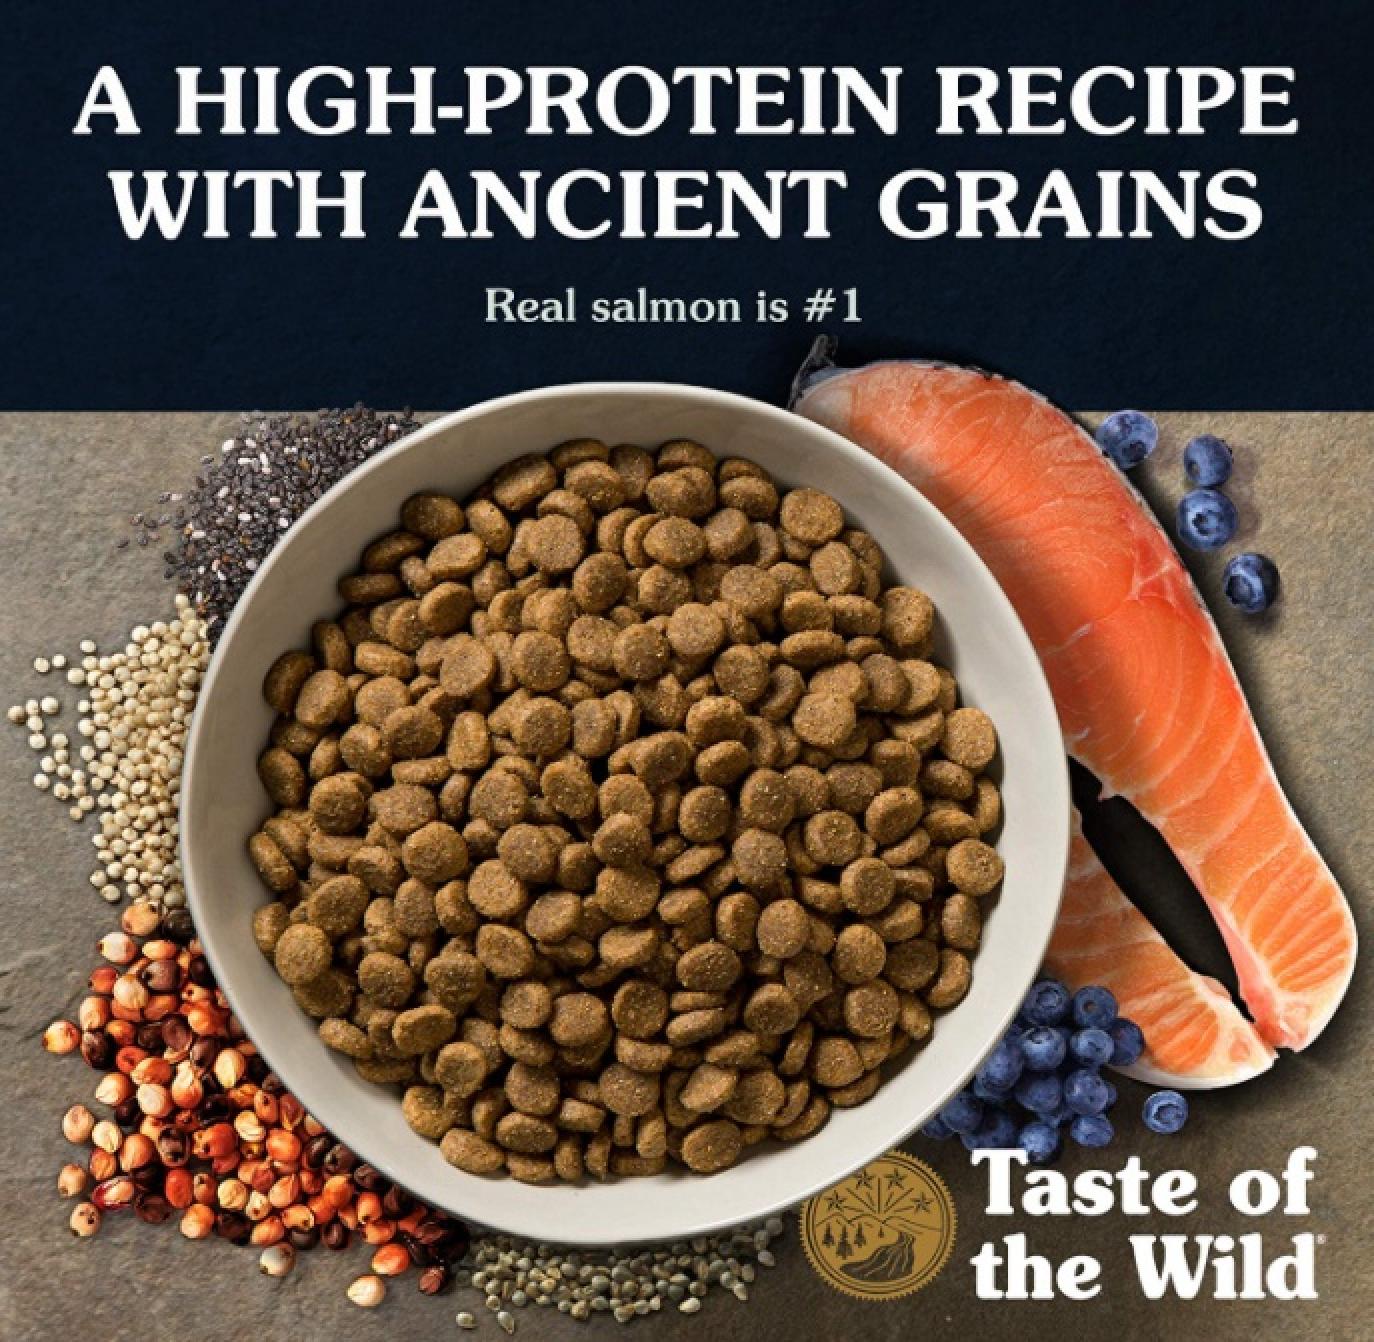 Taste of the Wild Ancient Stream with Smoked Salmon and Ancient Grains